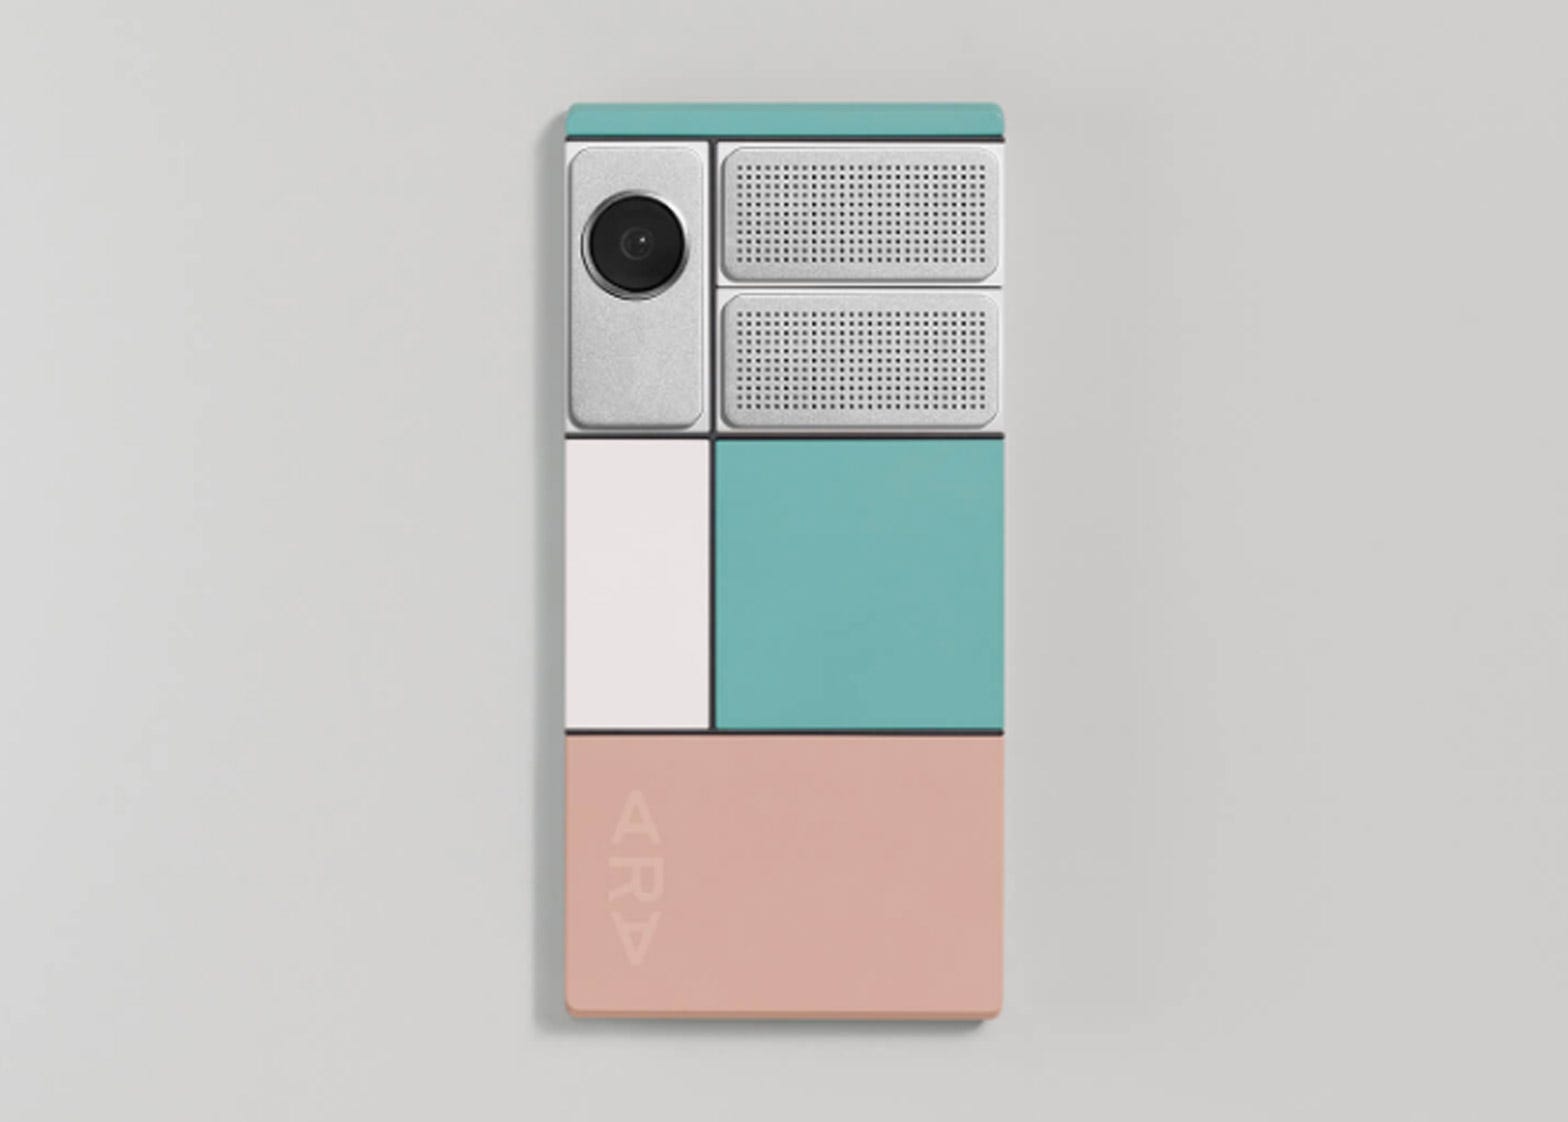 Why Did Google Kill Project ARA?. Is modular smartphone design in the age… | by Chris Kernaghan | Geek Culture Medium